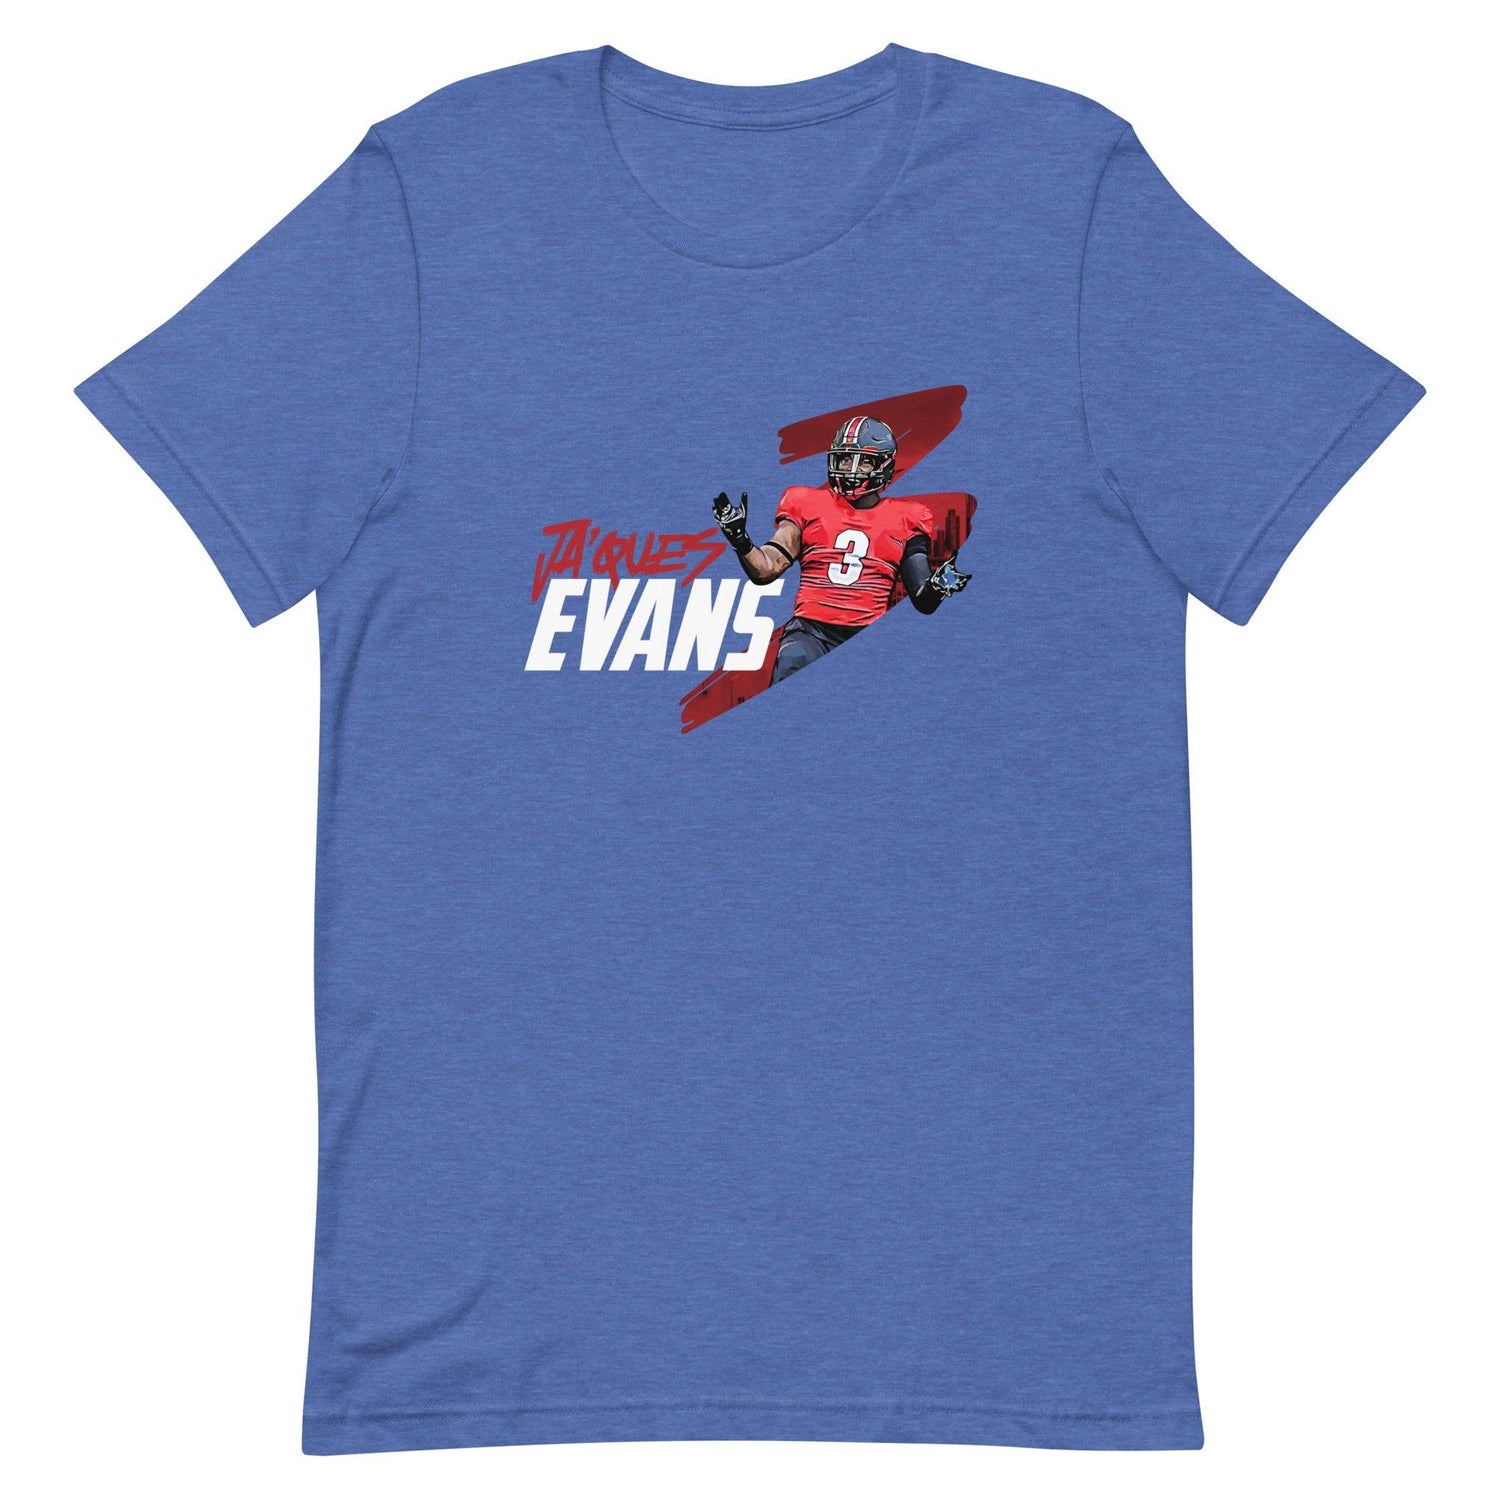 Jaques Evans "Gameday" t-shirt - Fan Arch